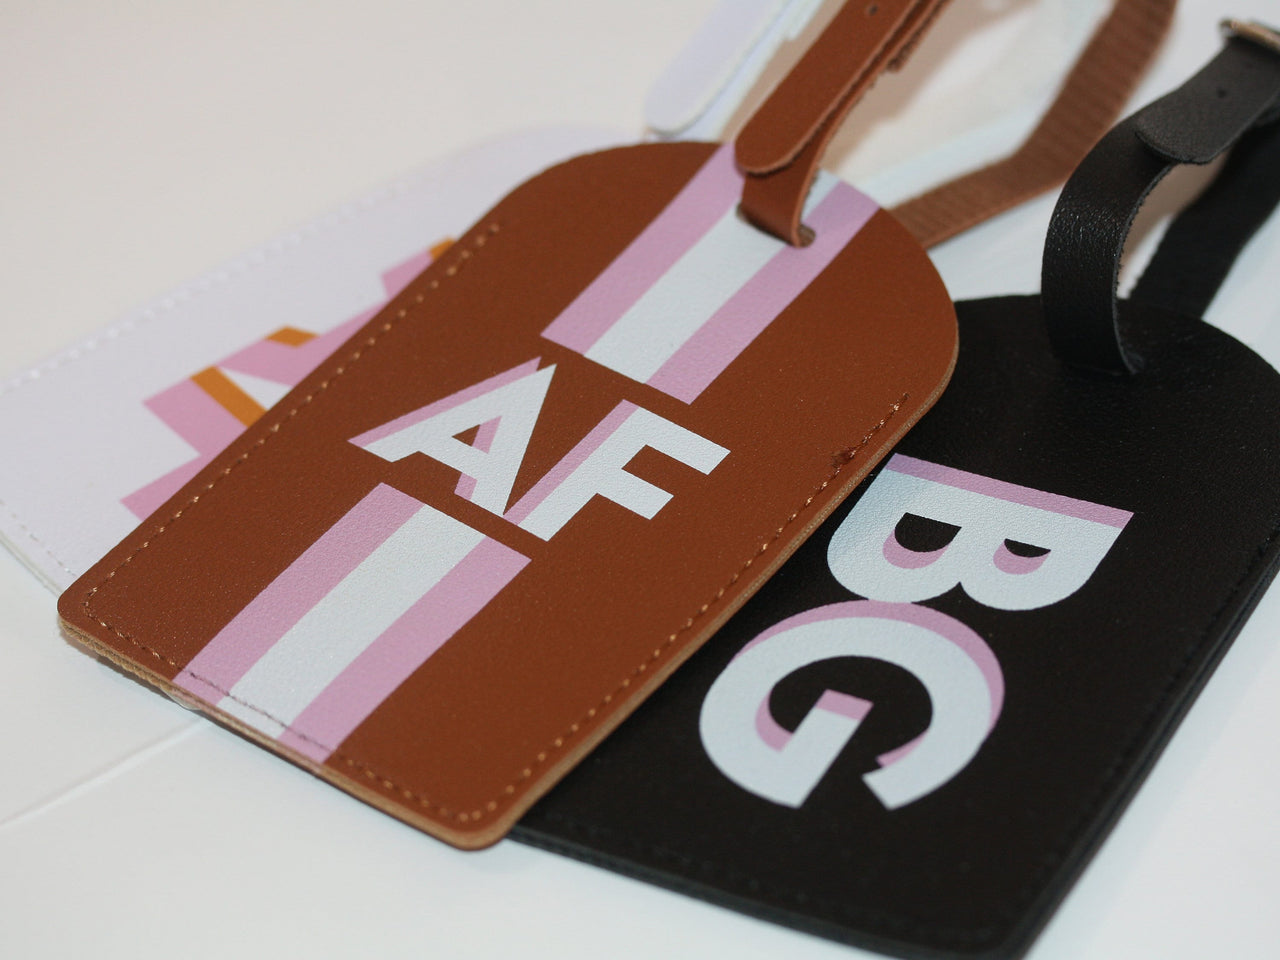 Personalized Shadow Monogram Vegan Leather Luggage Bag Tag Bridesmaid Gift Bachelorette Party Favors